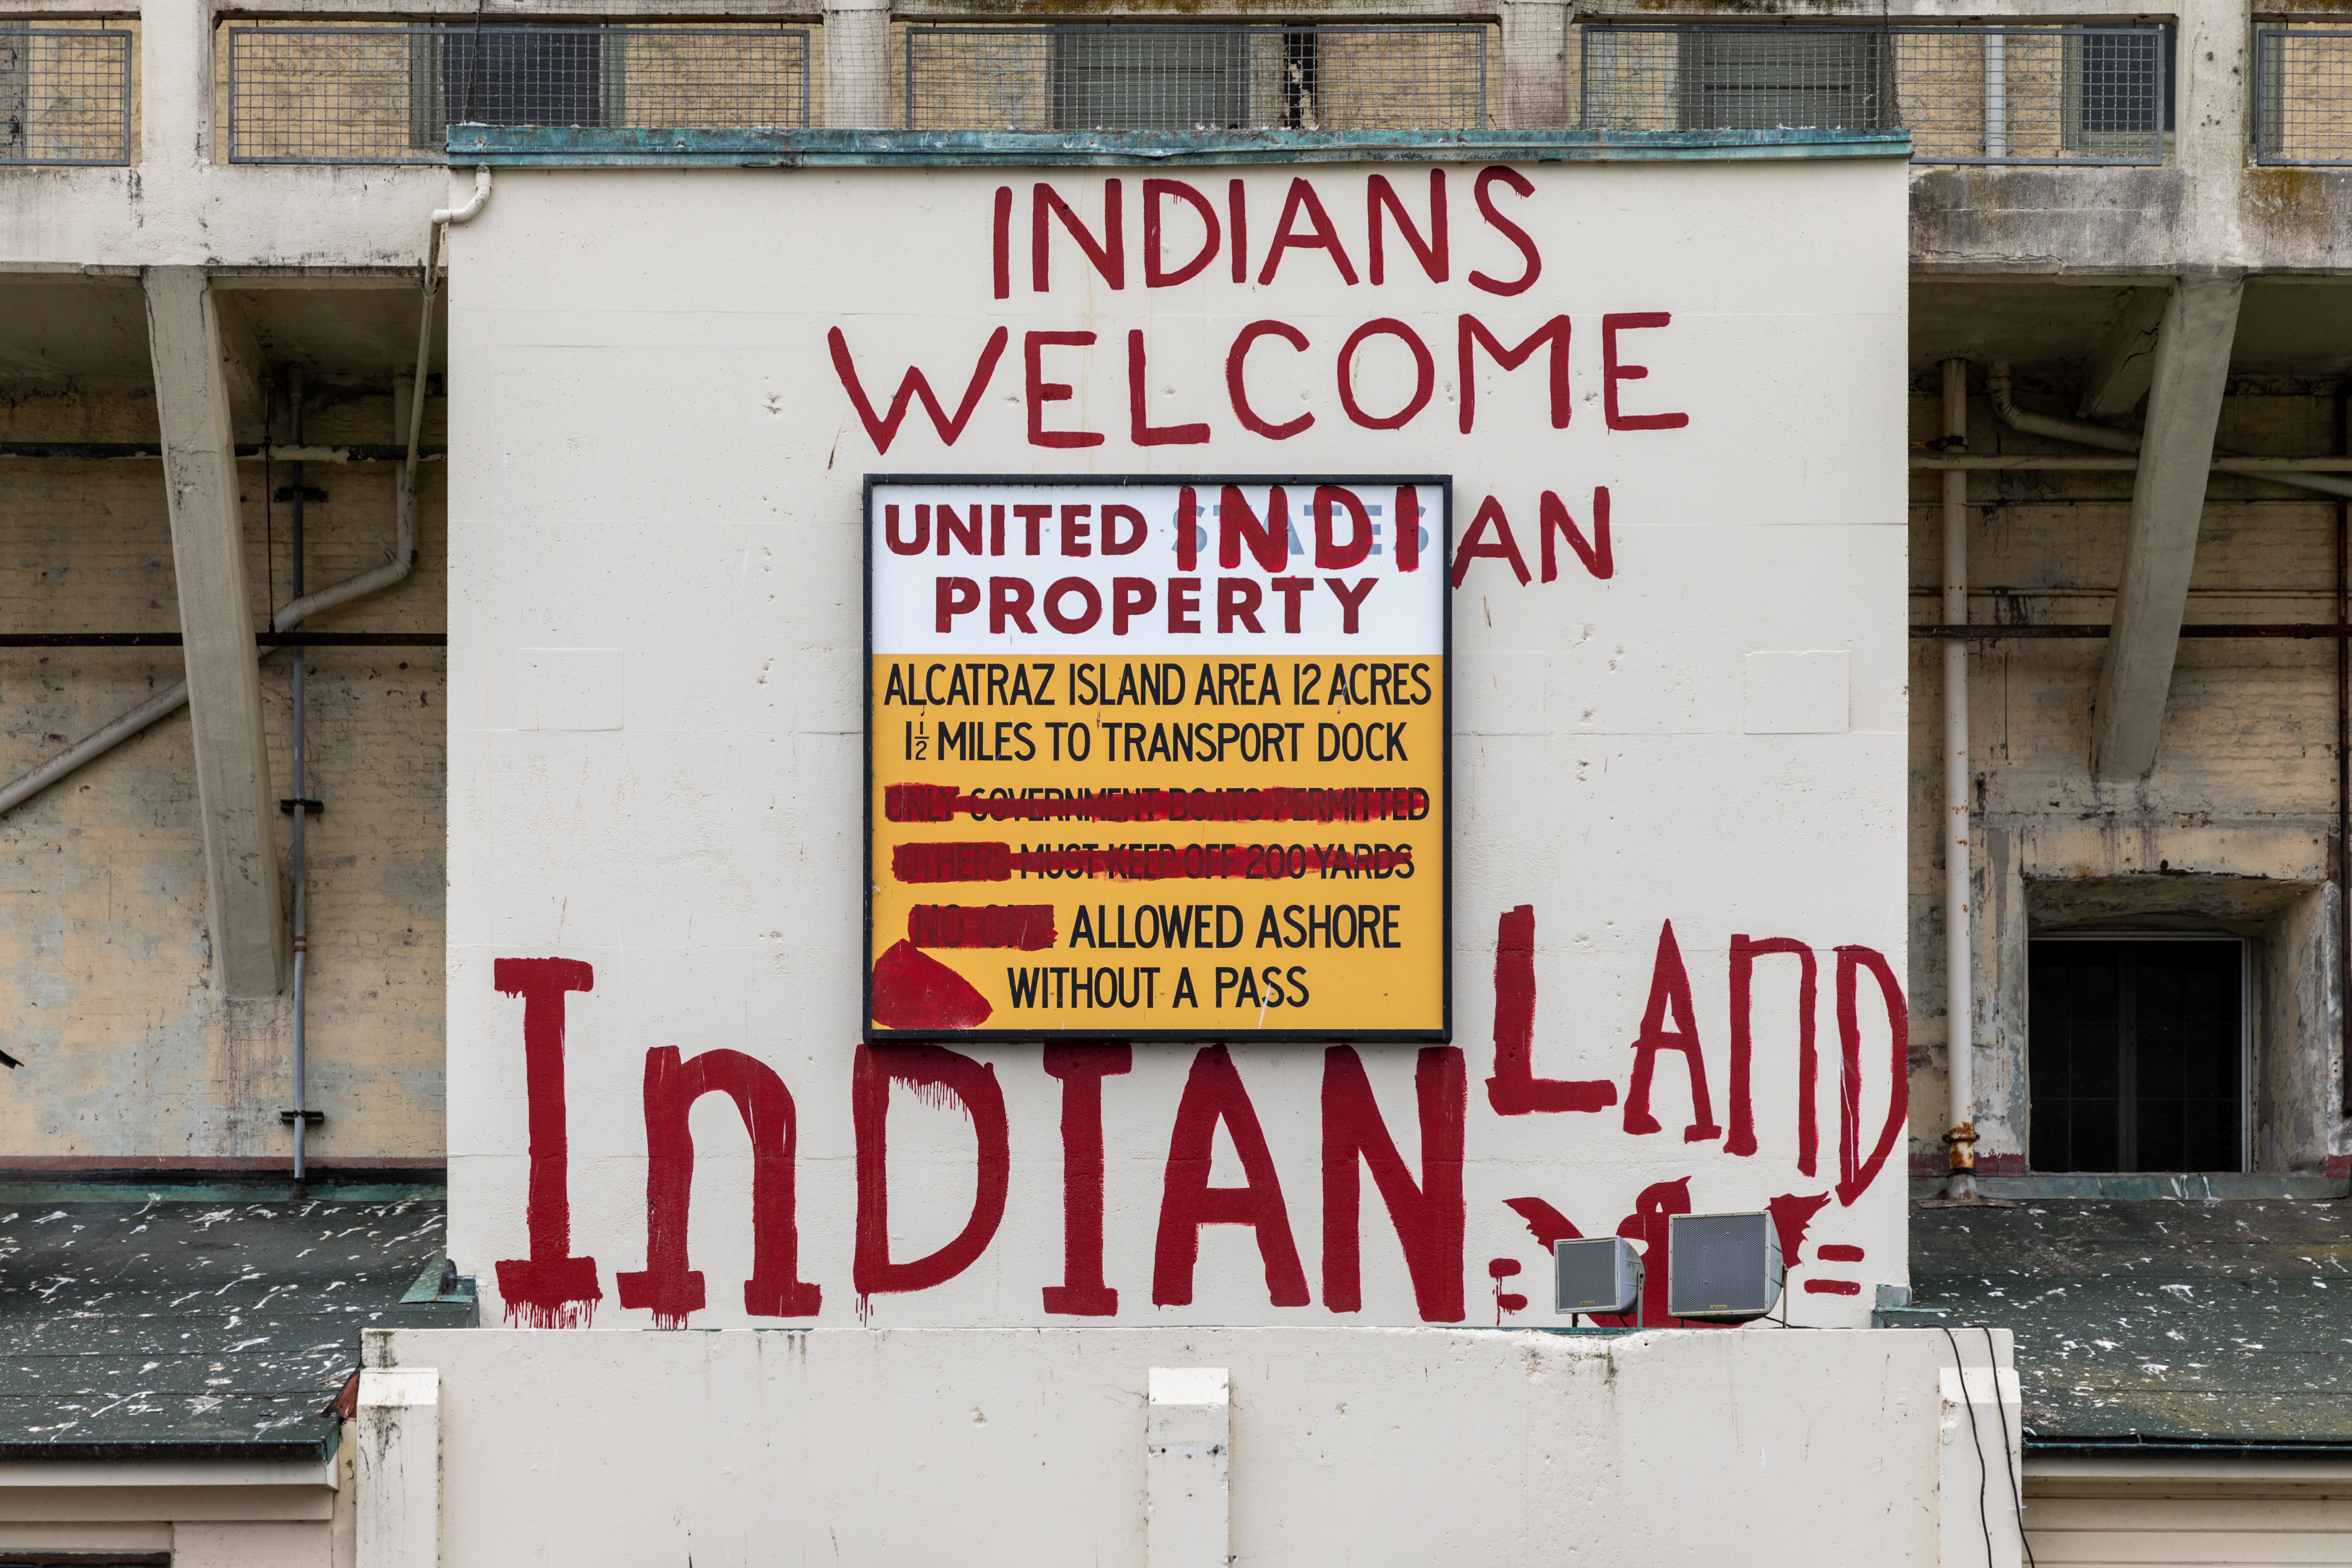 wall with phrases painted in red: "Indians Welcome" "United Indian Property" and "Indian Land'